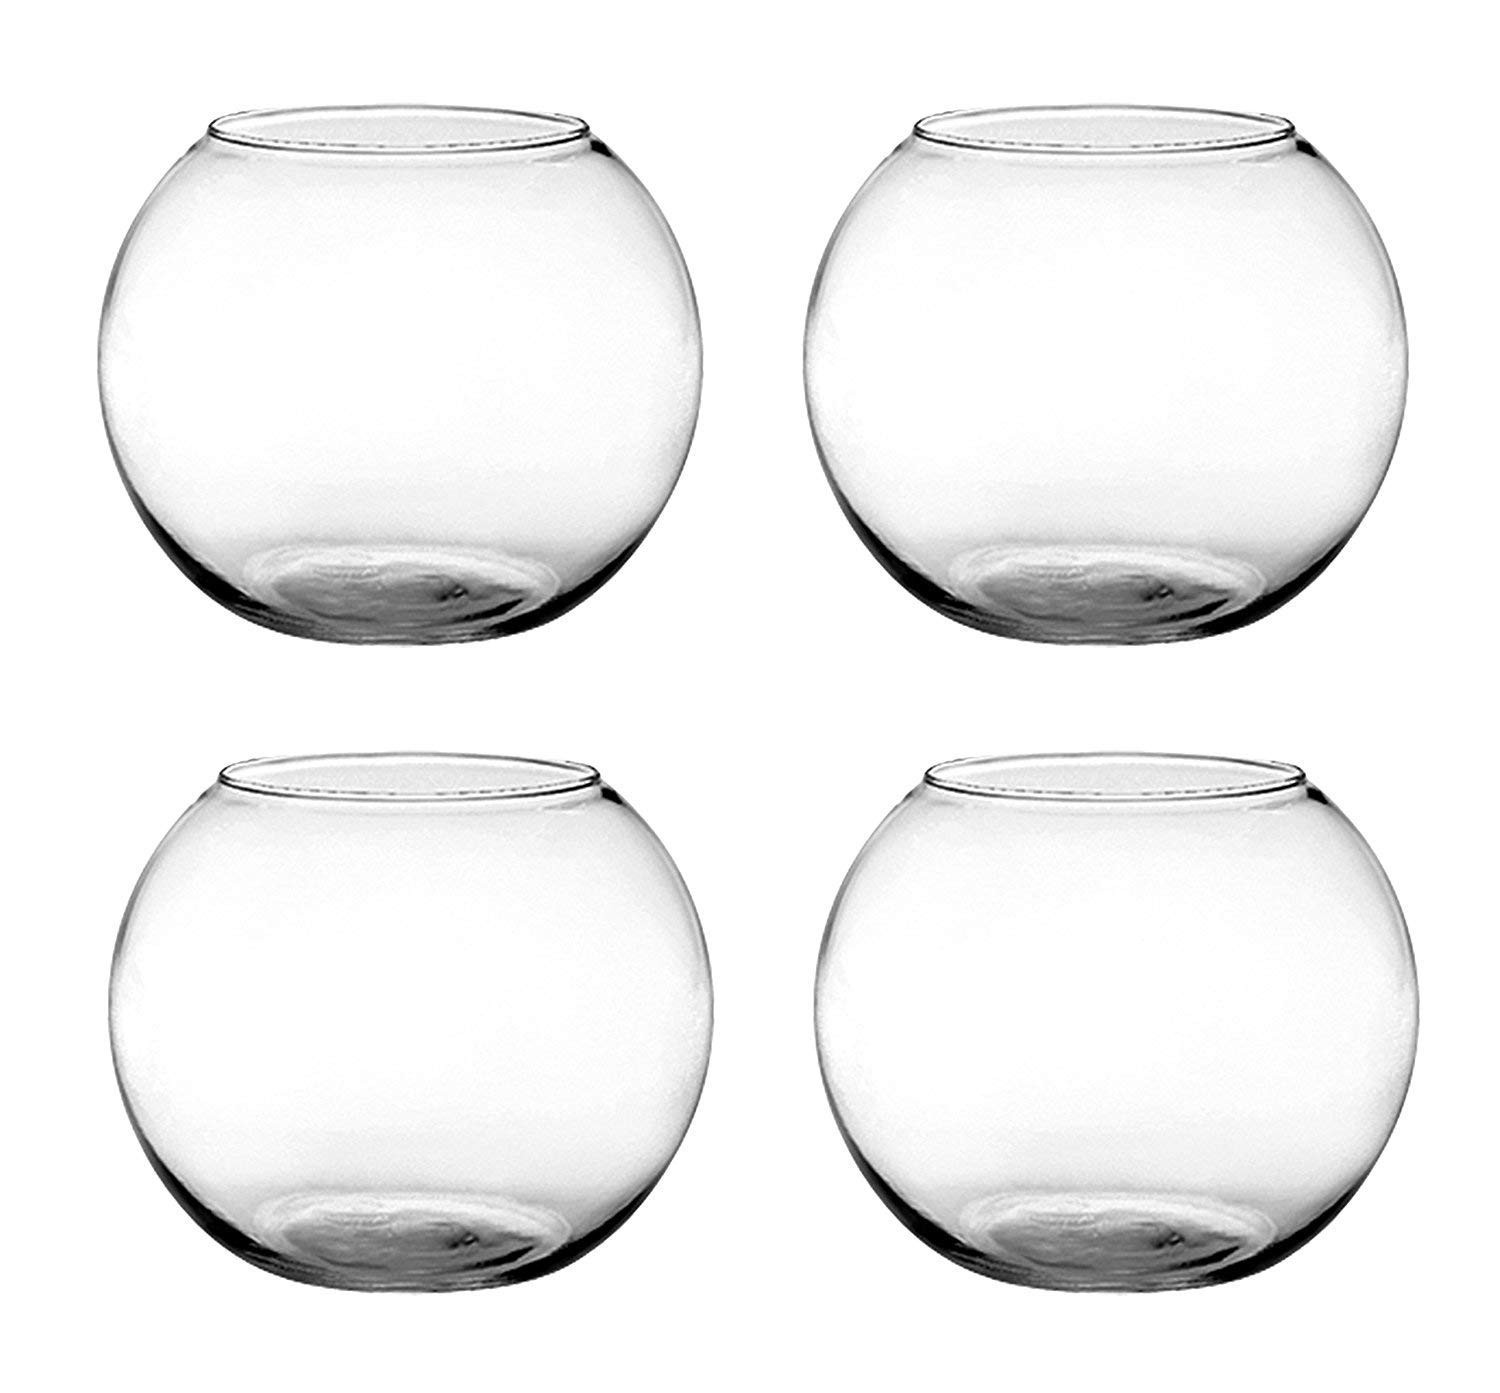 22 Wonderful Small Square Glass Vases Cheap 2024 free download small square glass vases cheap of amazon com floral supply online set of 4 6 rose bowls glass regarding amazon com floral supply online set of 4 6 rose bowls glass round vases for weddings e